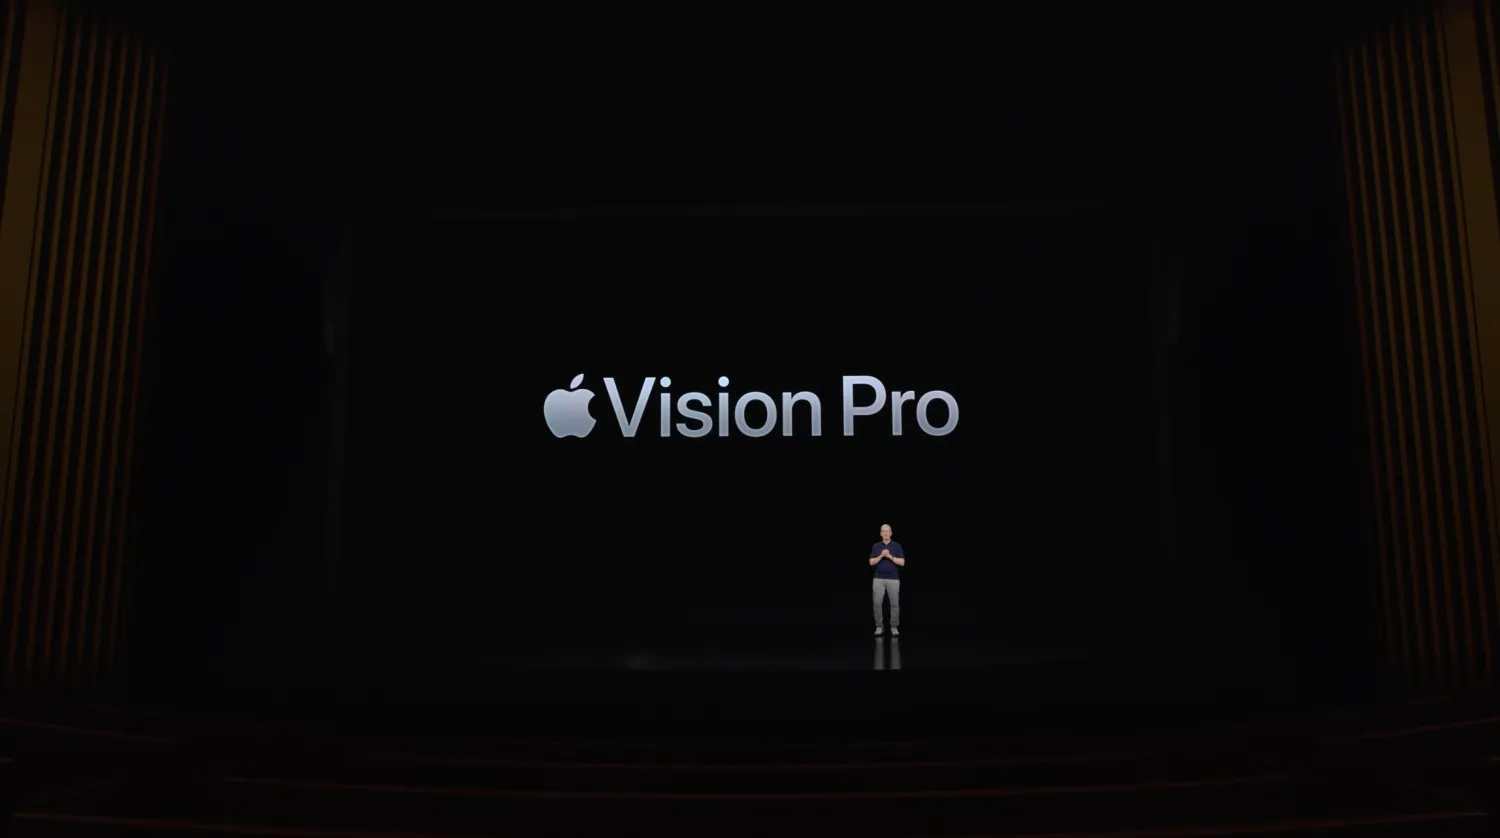 ❤ This is Apple Vision Pro, the mixed reality headset for spatial computing